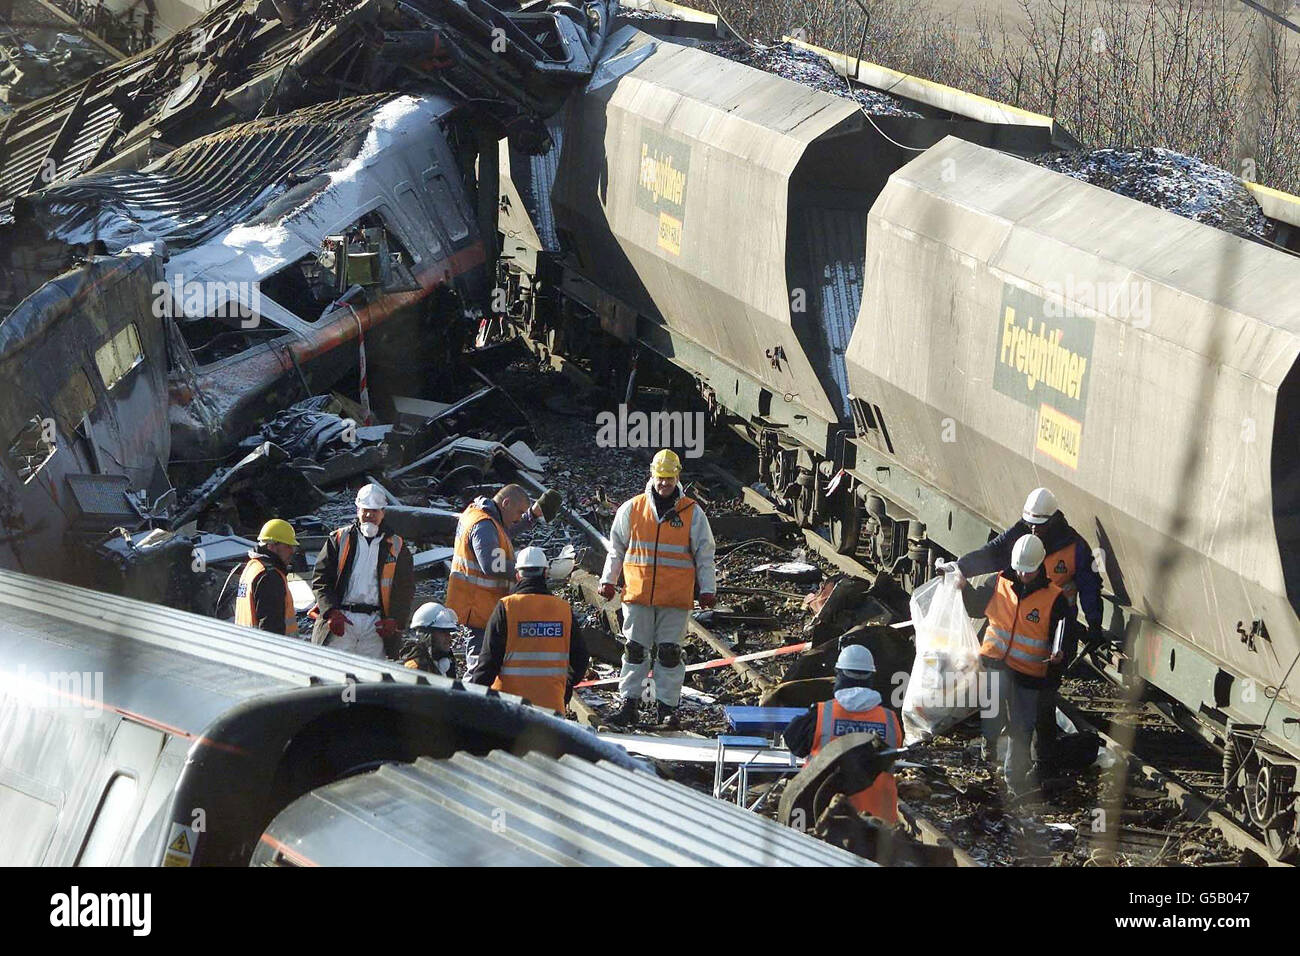 Emergency workers carry out a search and begin to remove personal belongings, at the scene at Great Heck, nr Selby, Yorkshire. Work is continuing following the railway crash in which 13 people are thought to have died. * However, police have warned that more bodies may be recovered as the process of lifting the wrecked carriage begins. Stock Photo